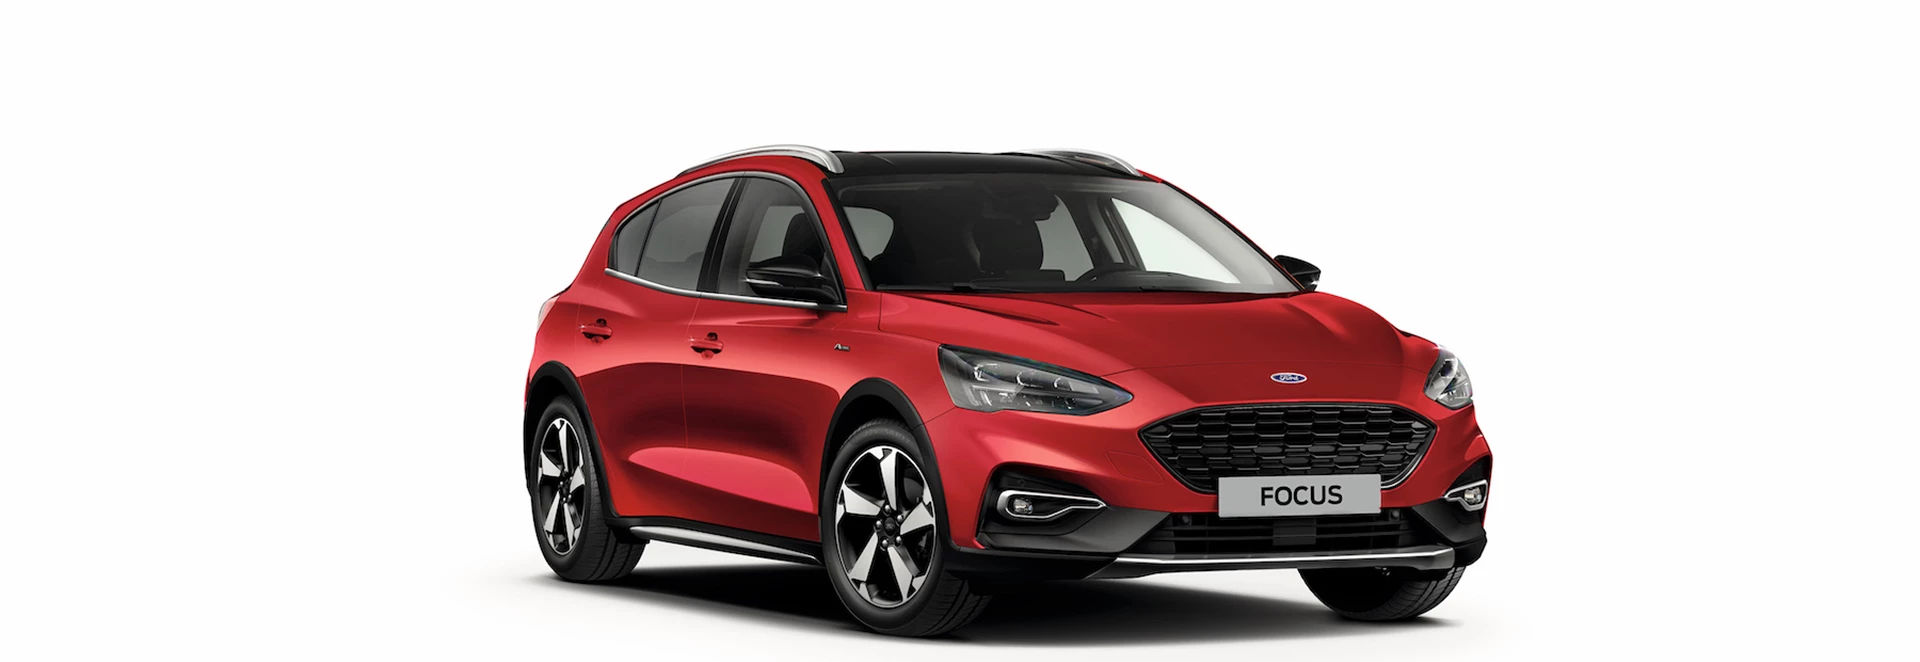 Best-selling Ford Focus range expanded with new Active X Vignale trim level 